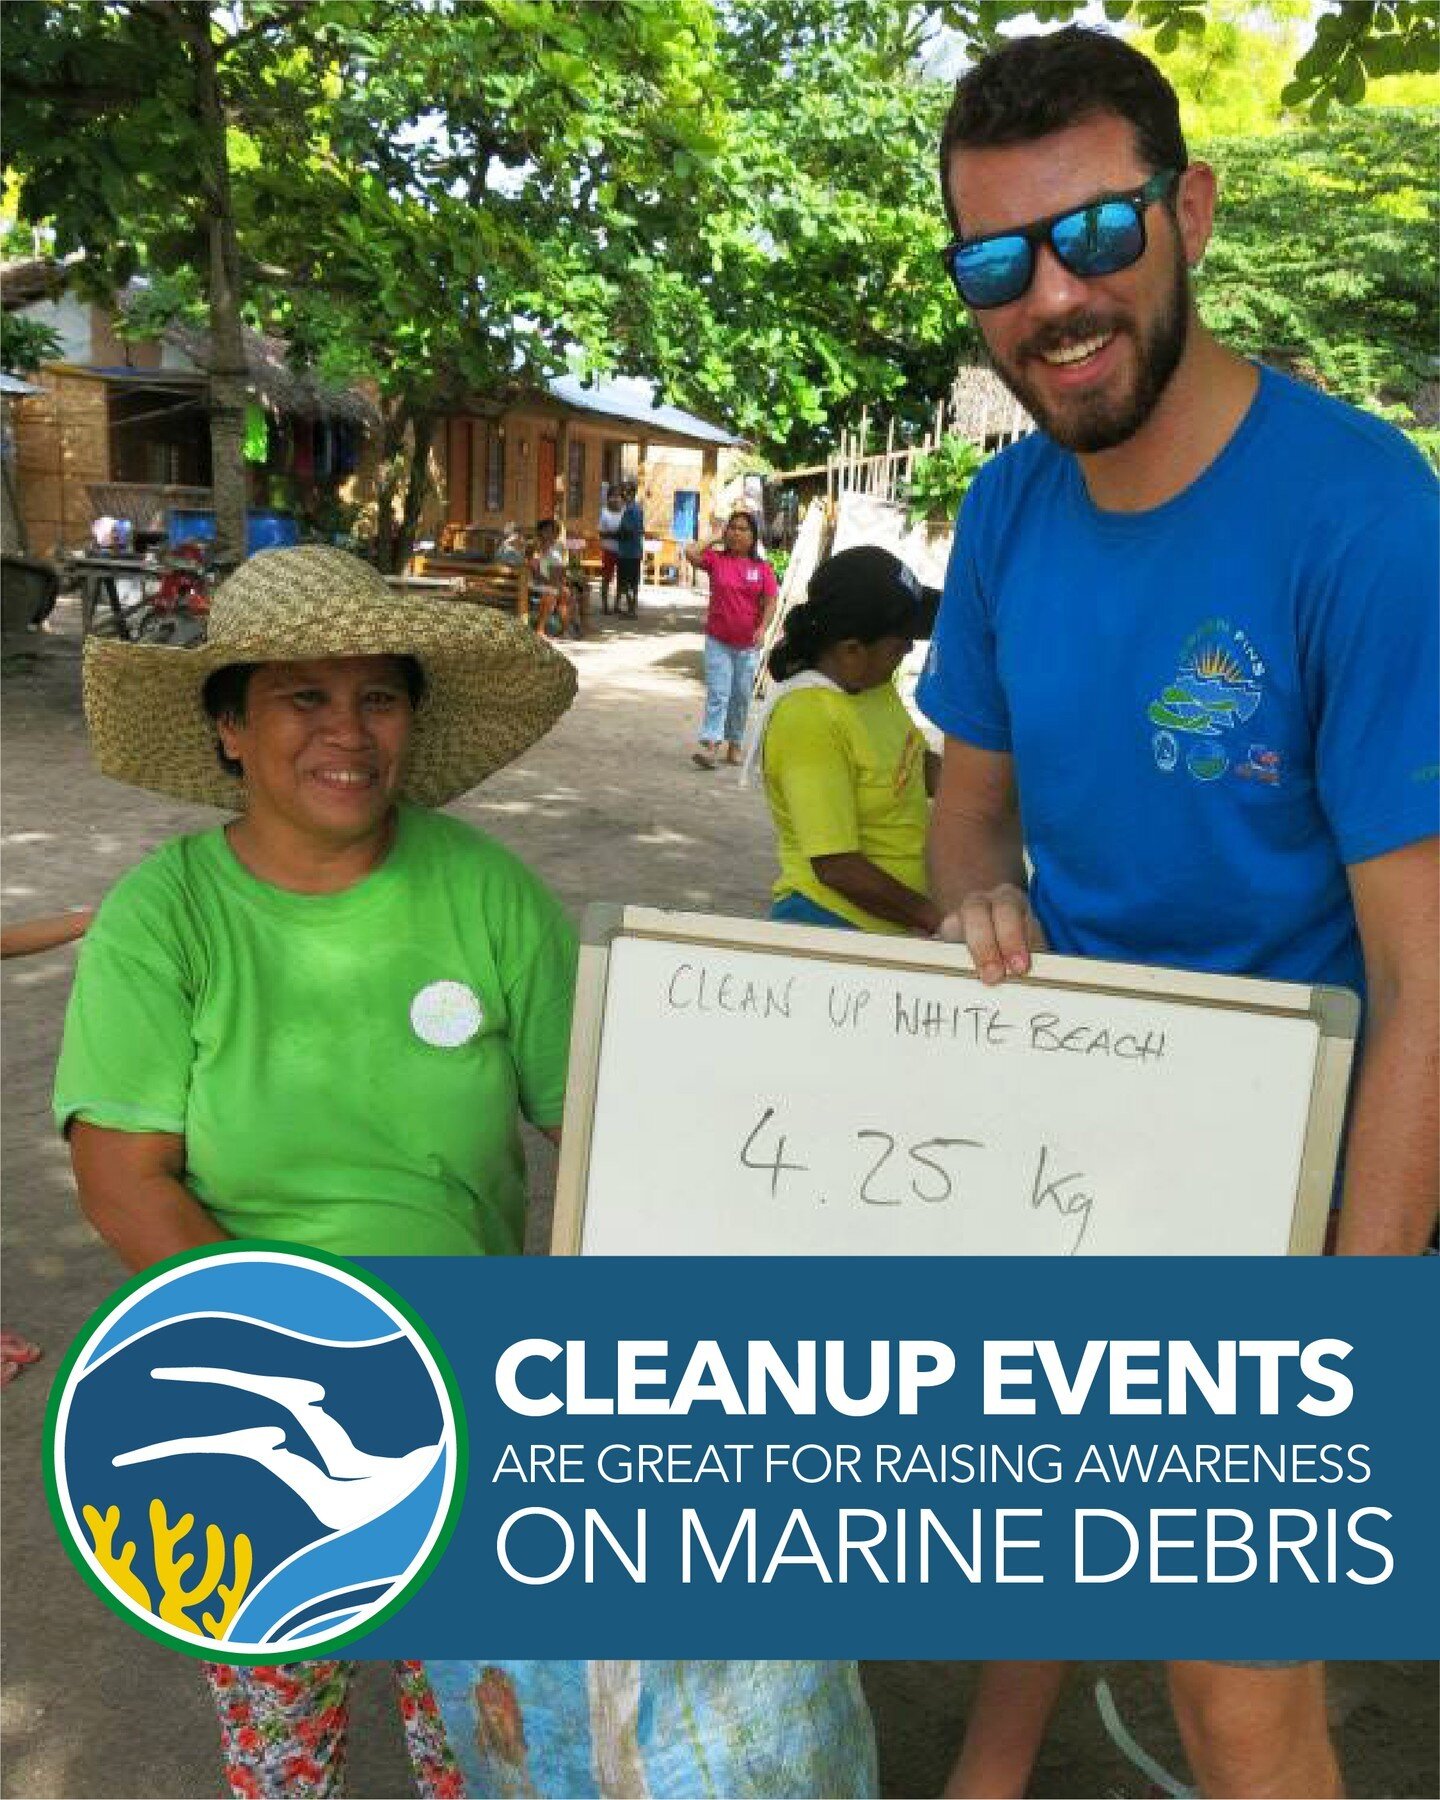 💡Cleanup events are great for raising awareness of marine debris issues.

You will meet a lot of people from all walks of life during cleanup events. From local children and adults to international visitors. Therefore, making cleanup events an excel